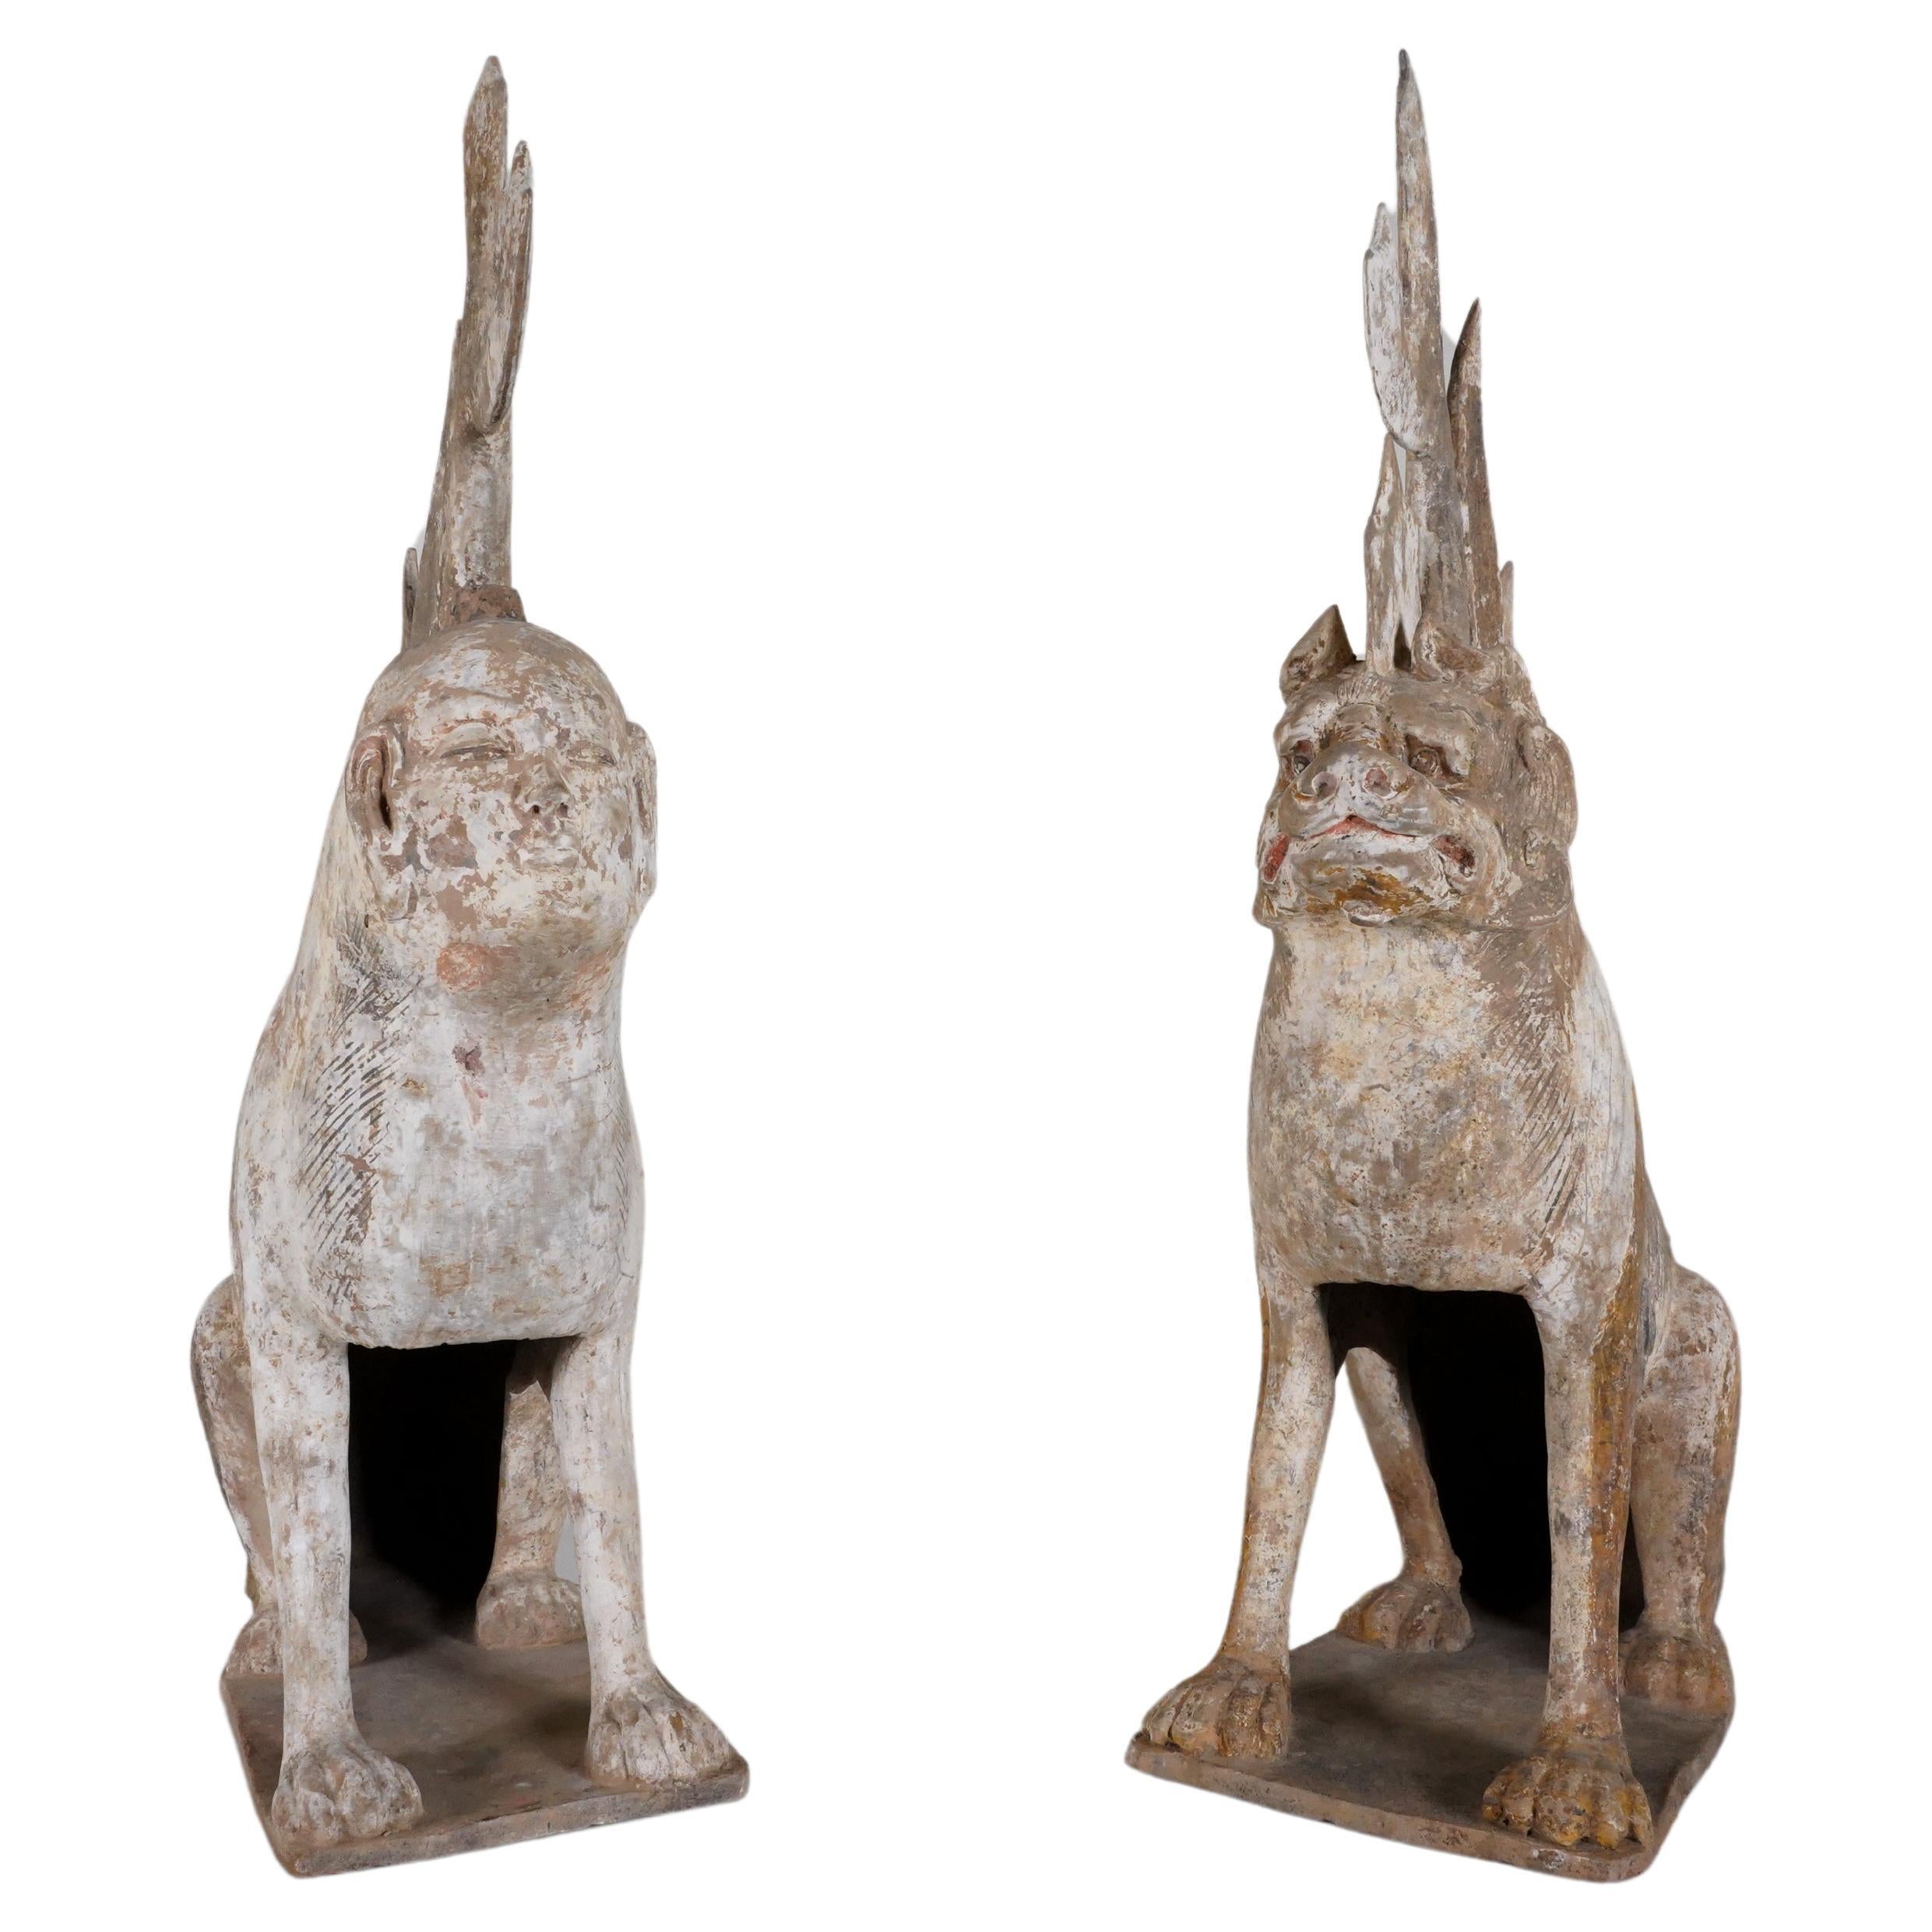 A Pair of Tang Dynasty (618-907 CE) Pottery Earth Spirit Figures For Sale